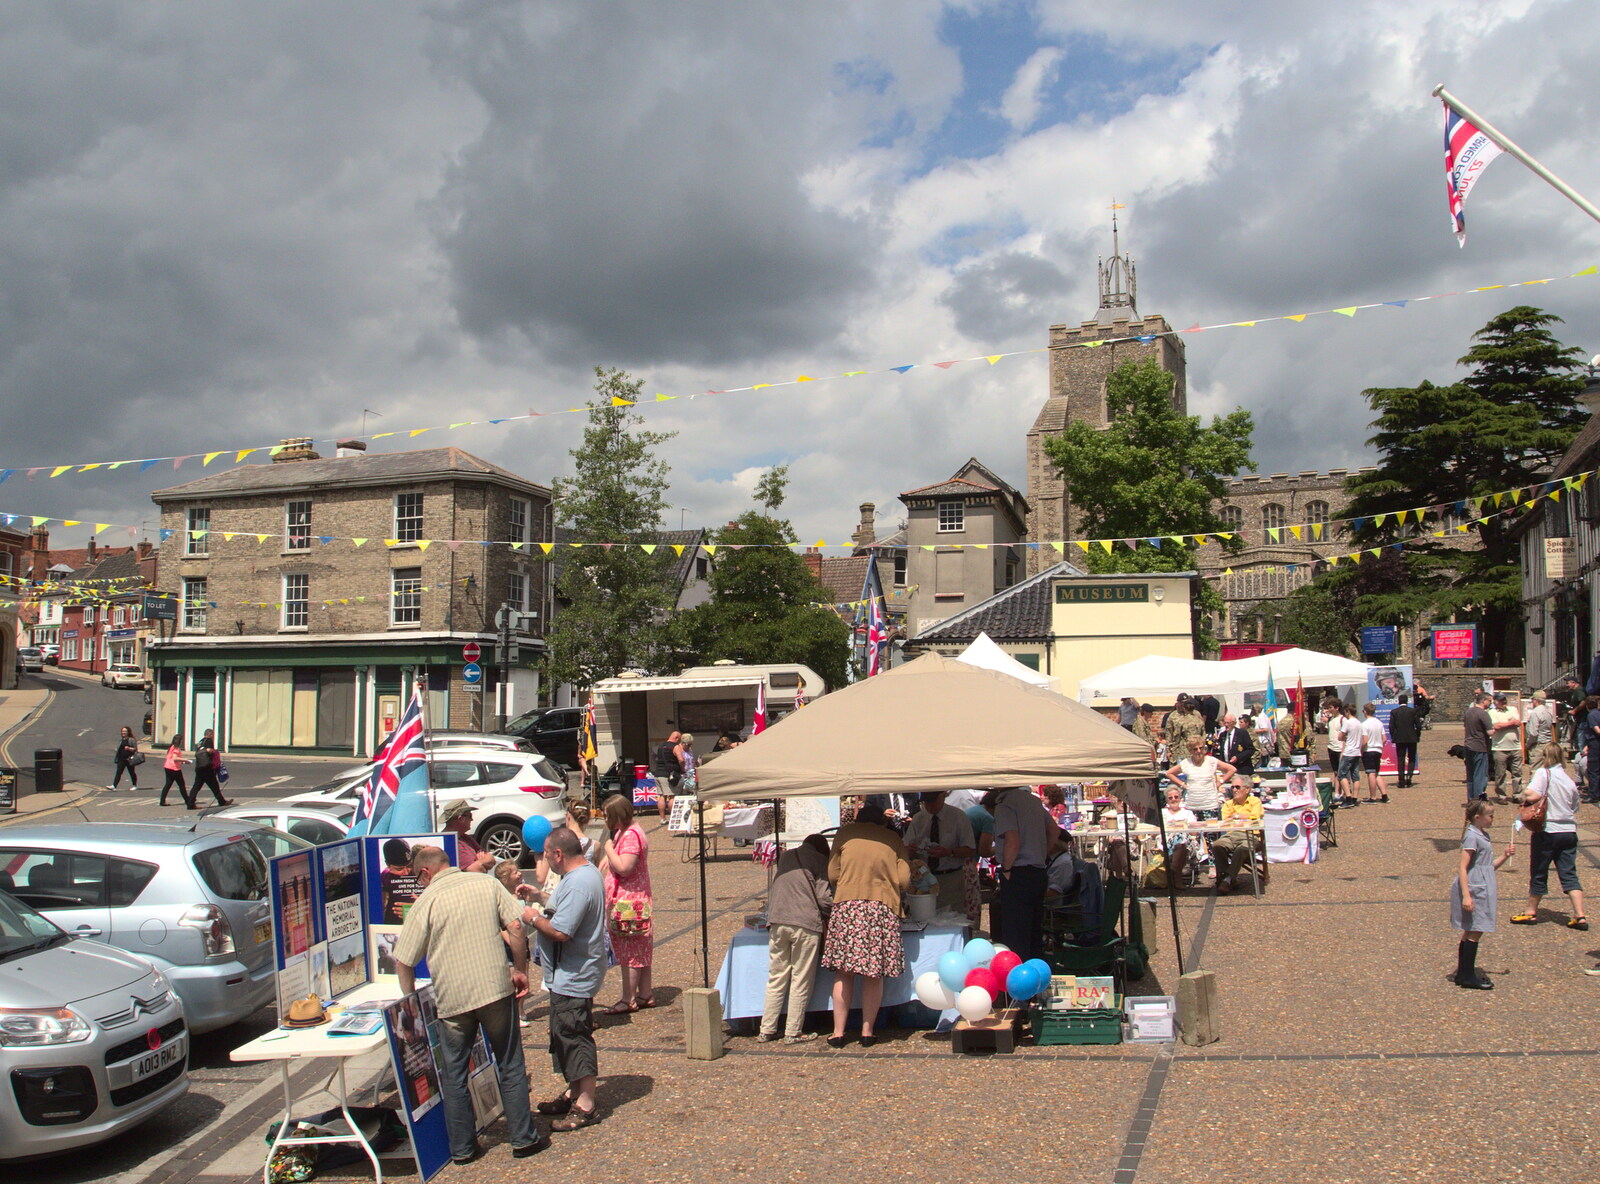 A busy market place from A visit from Da Gorls, Brome, Suffolk - 27th June 2015